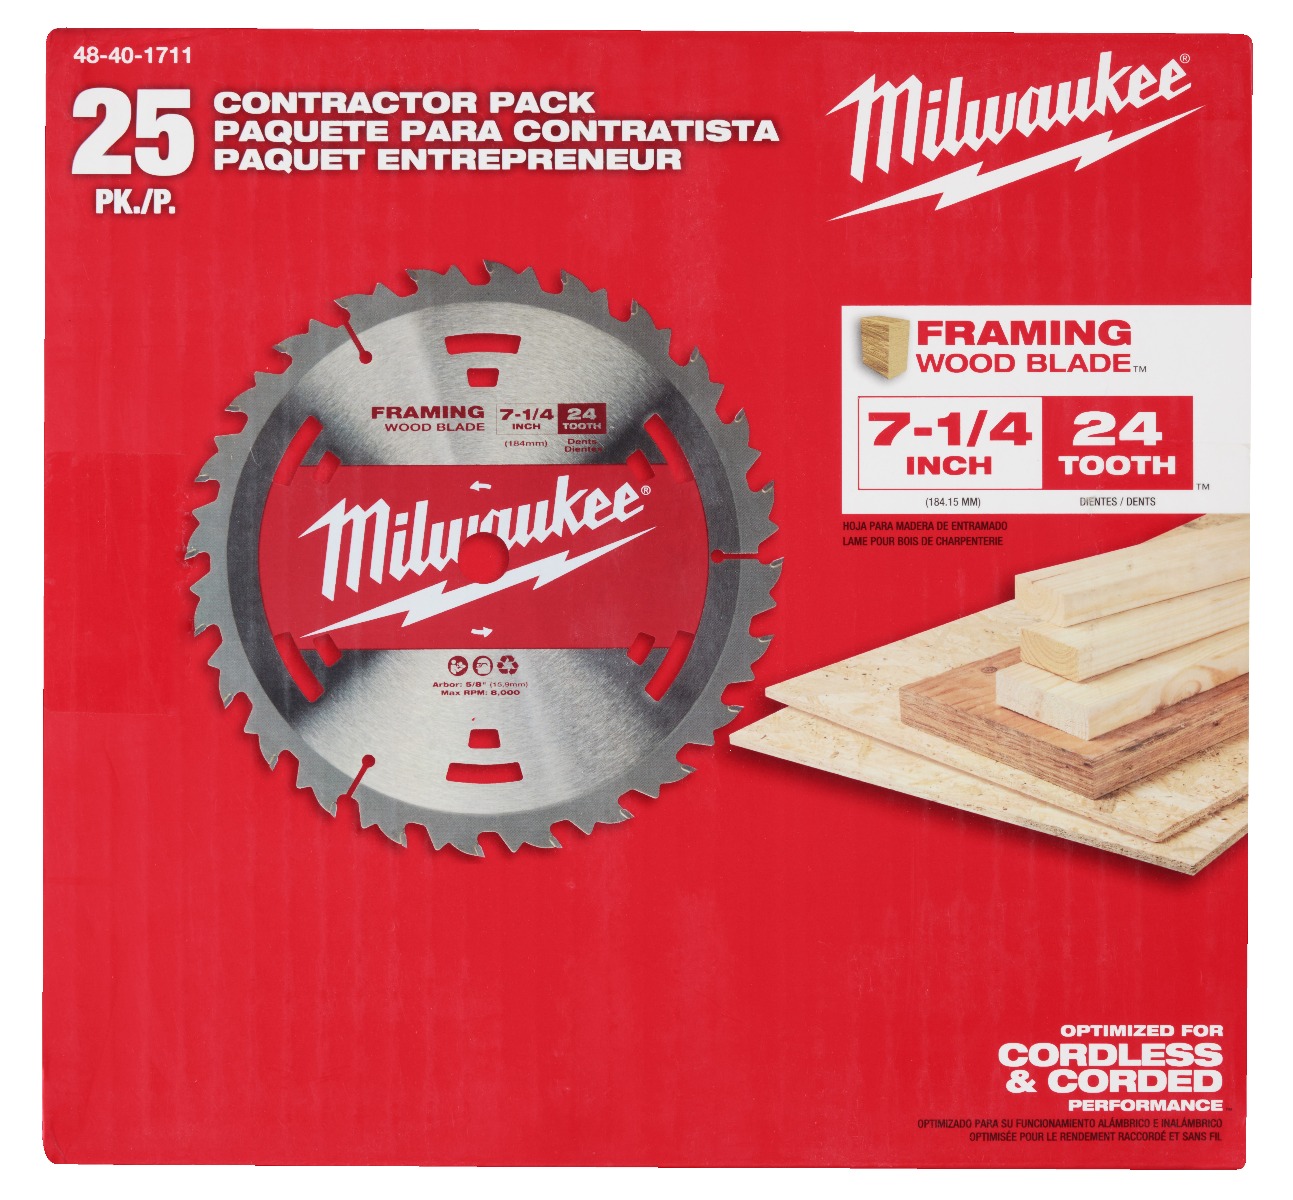 7-1/4" 24T Construction Framing Contractor Pack (25PK)